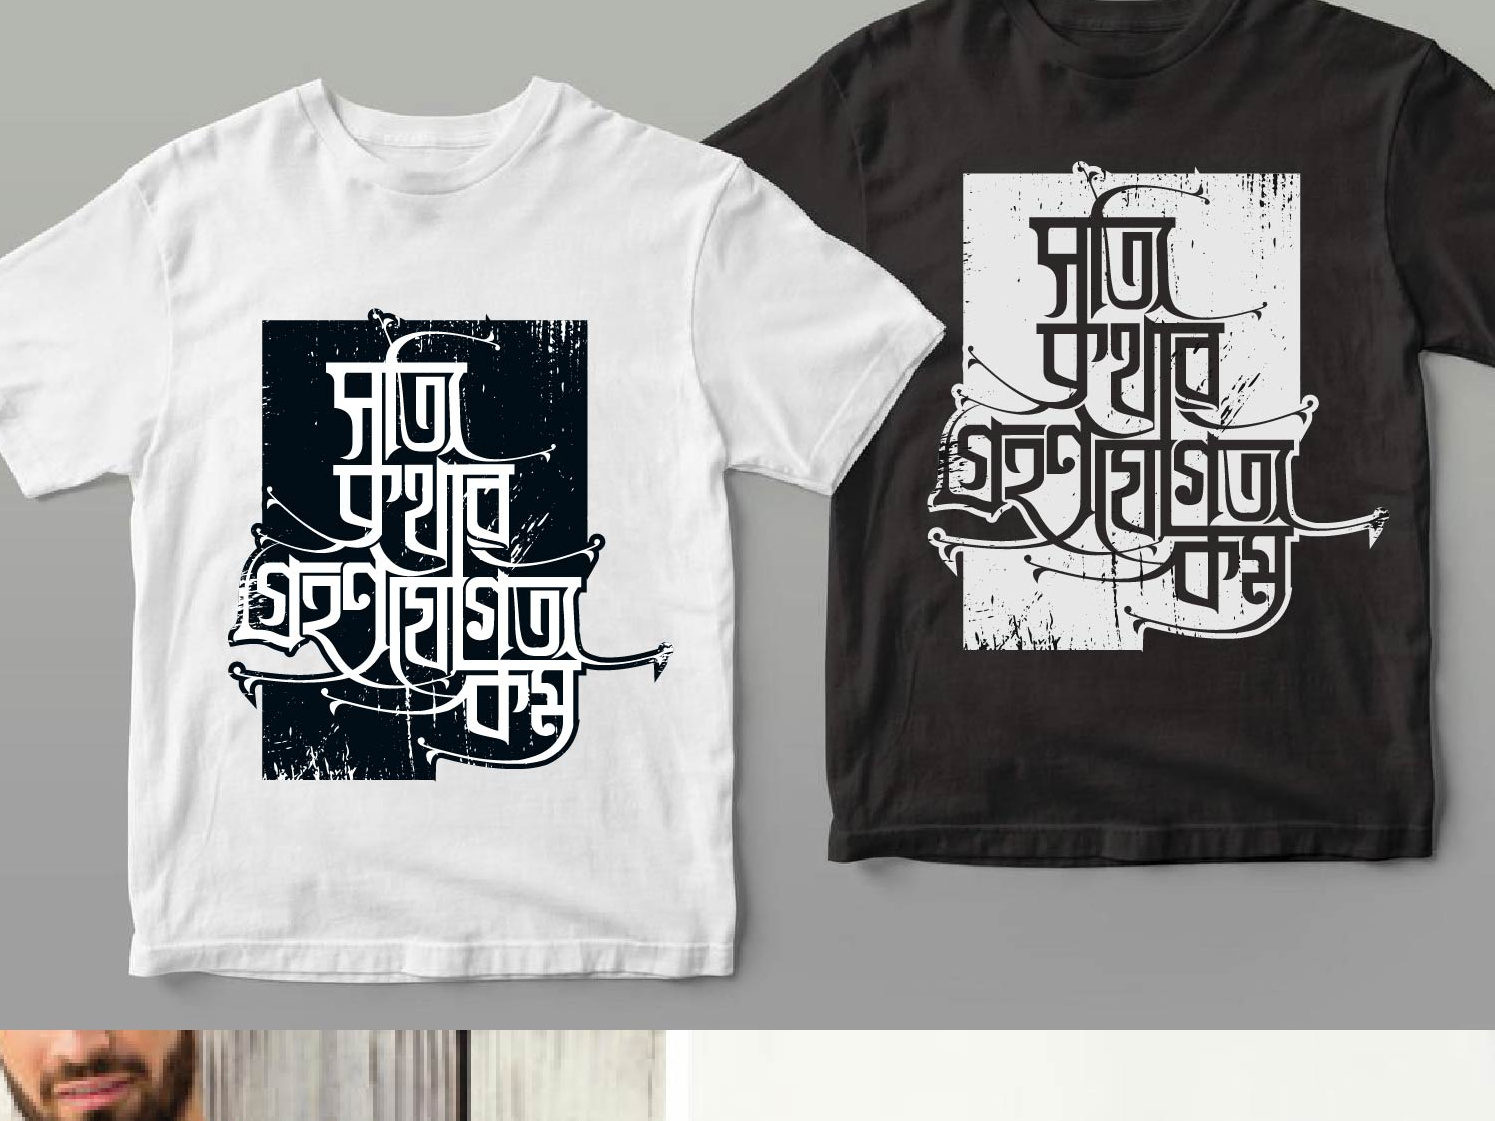 Bangla typography T-shirt design by Md on Dribbble